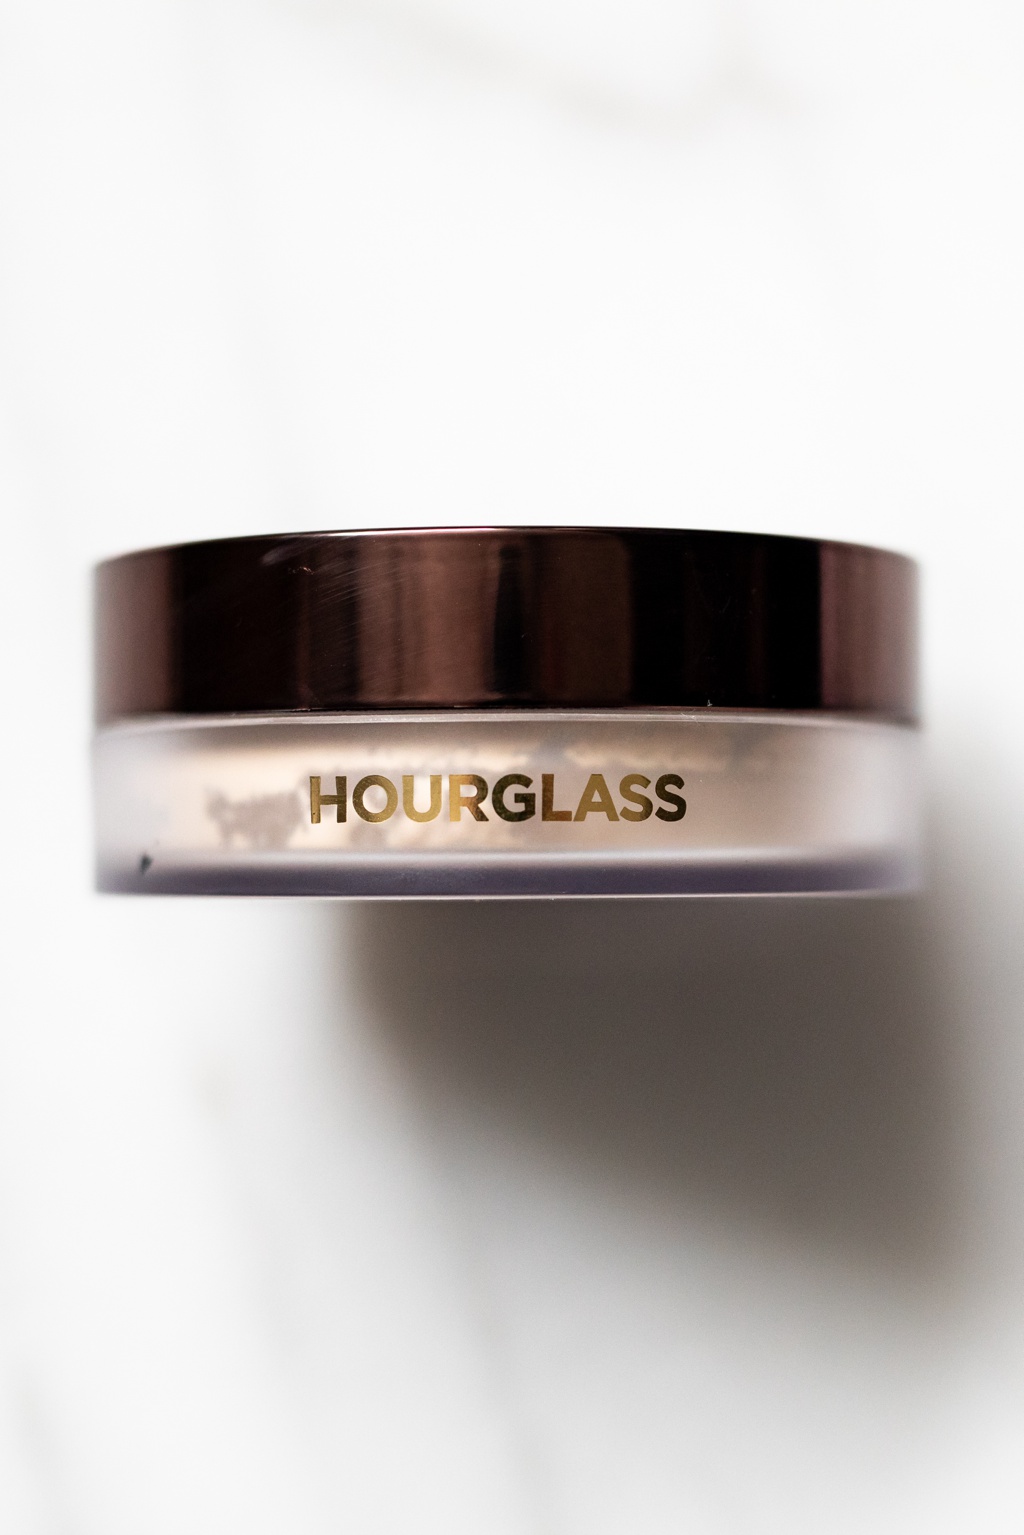 Beauty Products | Hourglass | Fancy Face Makeup